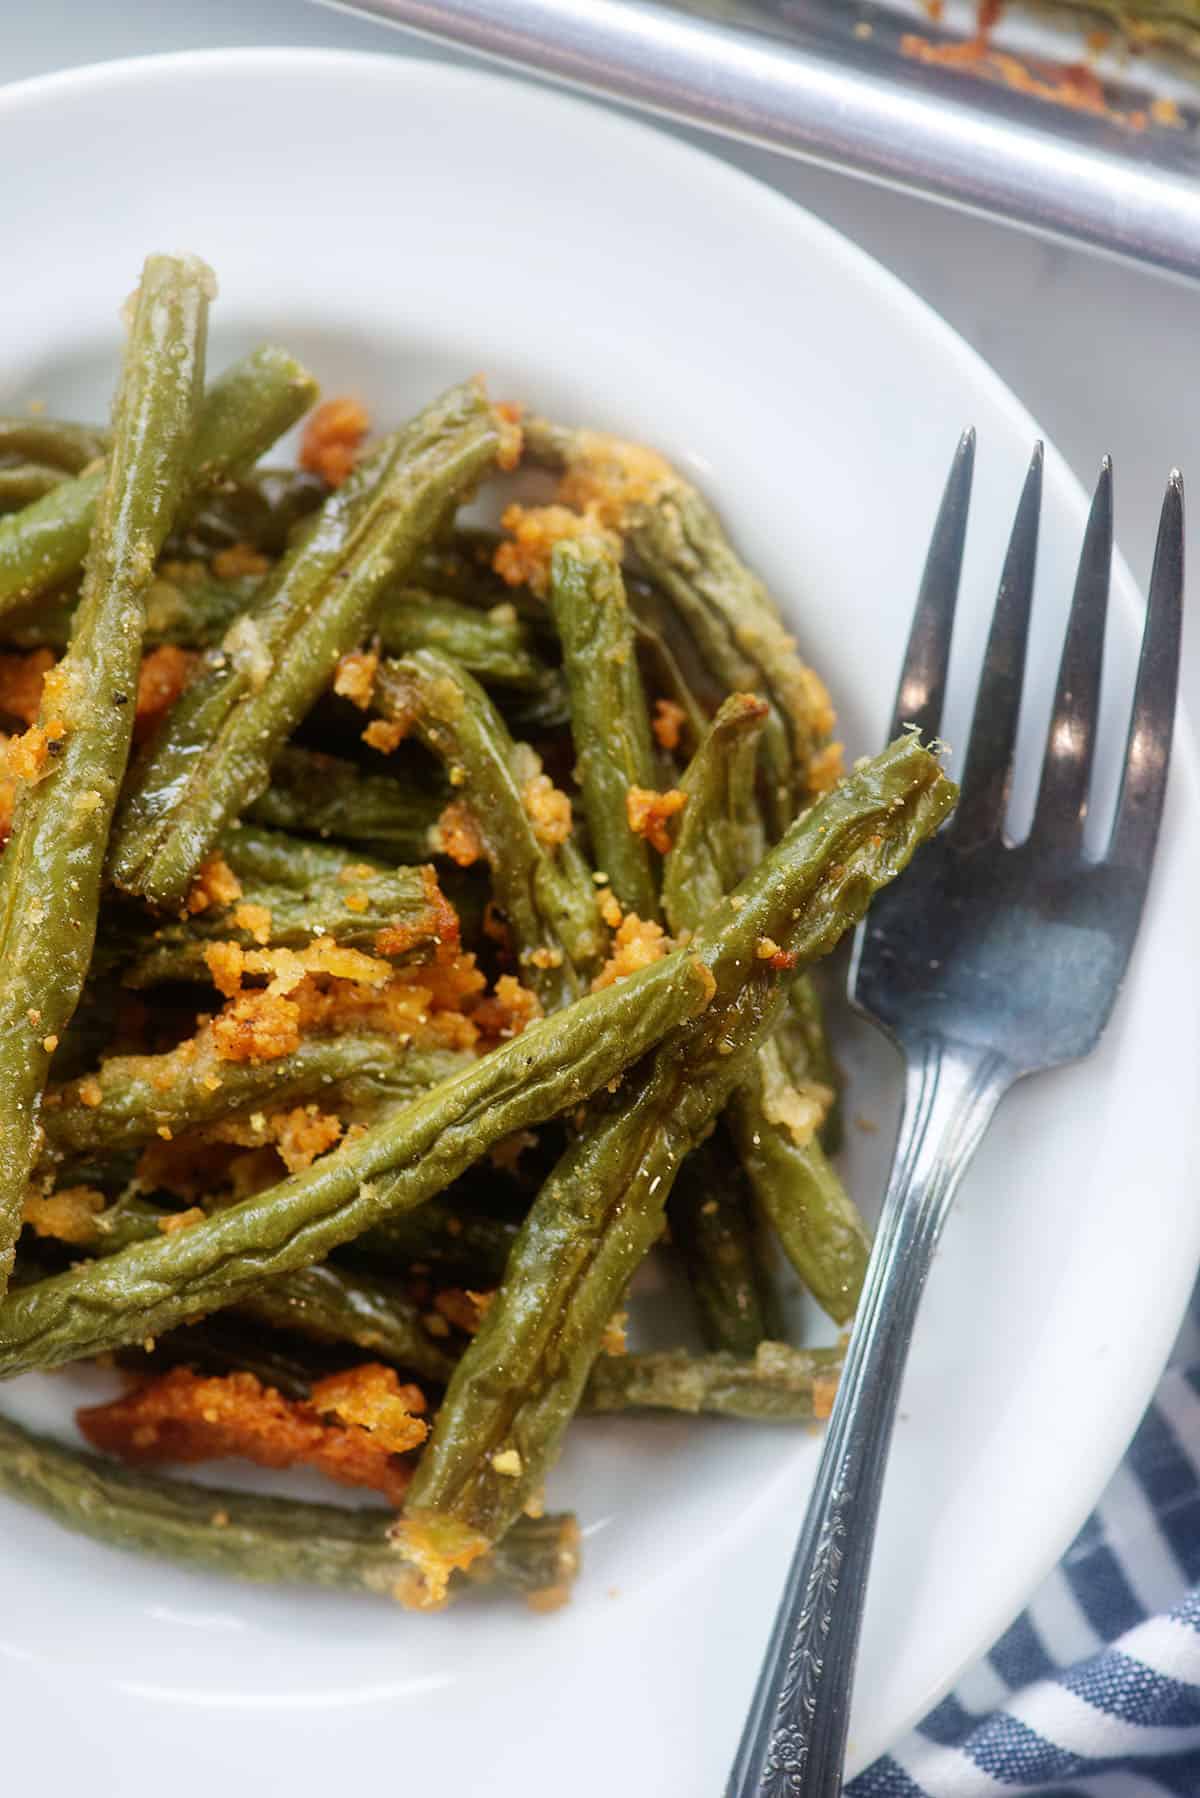 cooked green beans on plate.